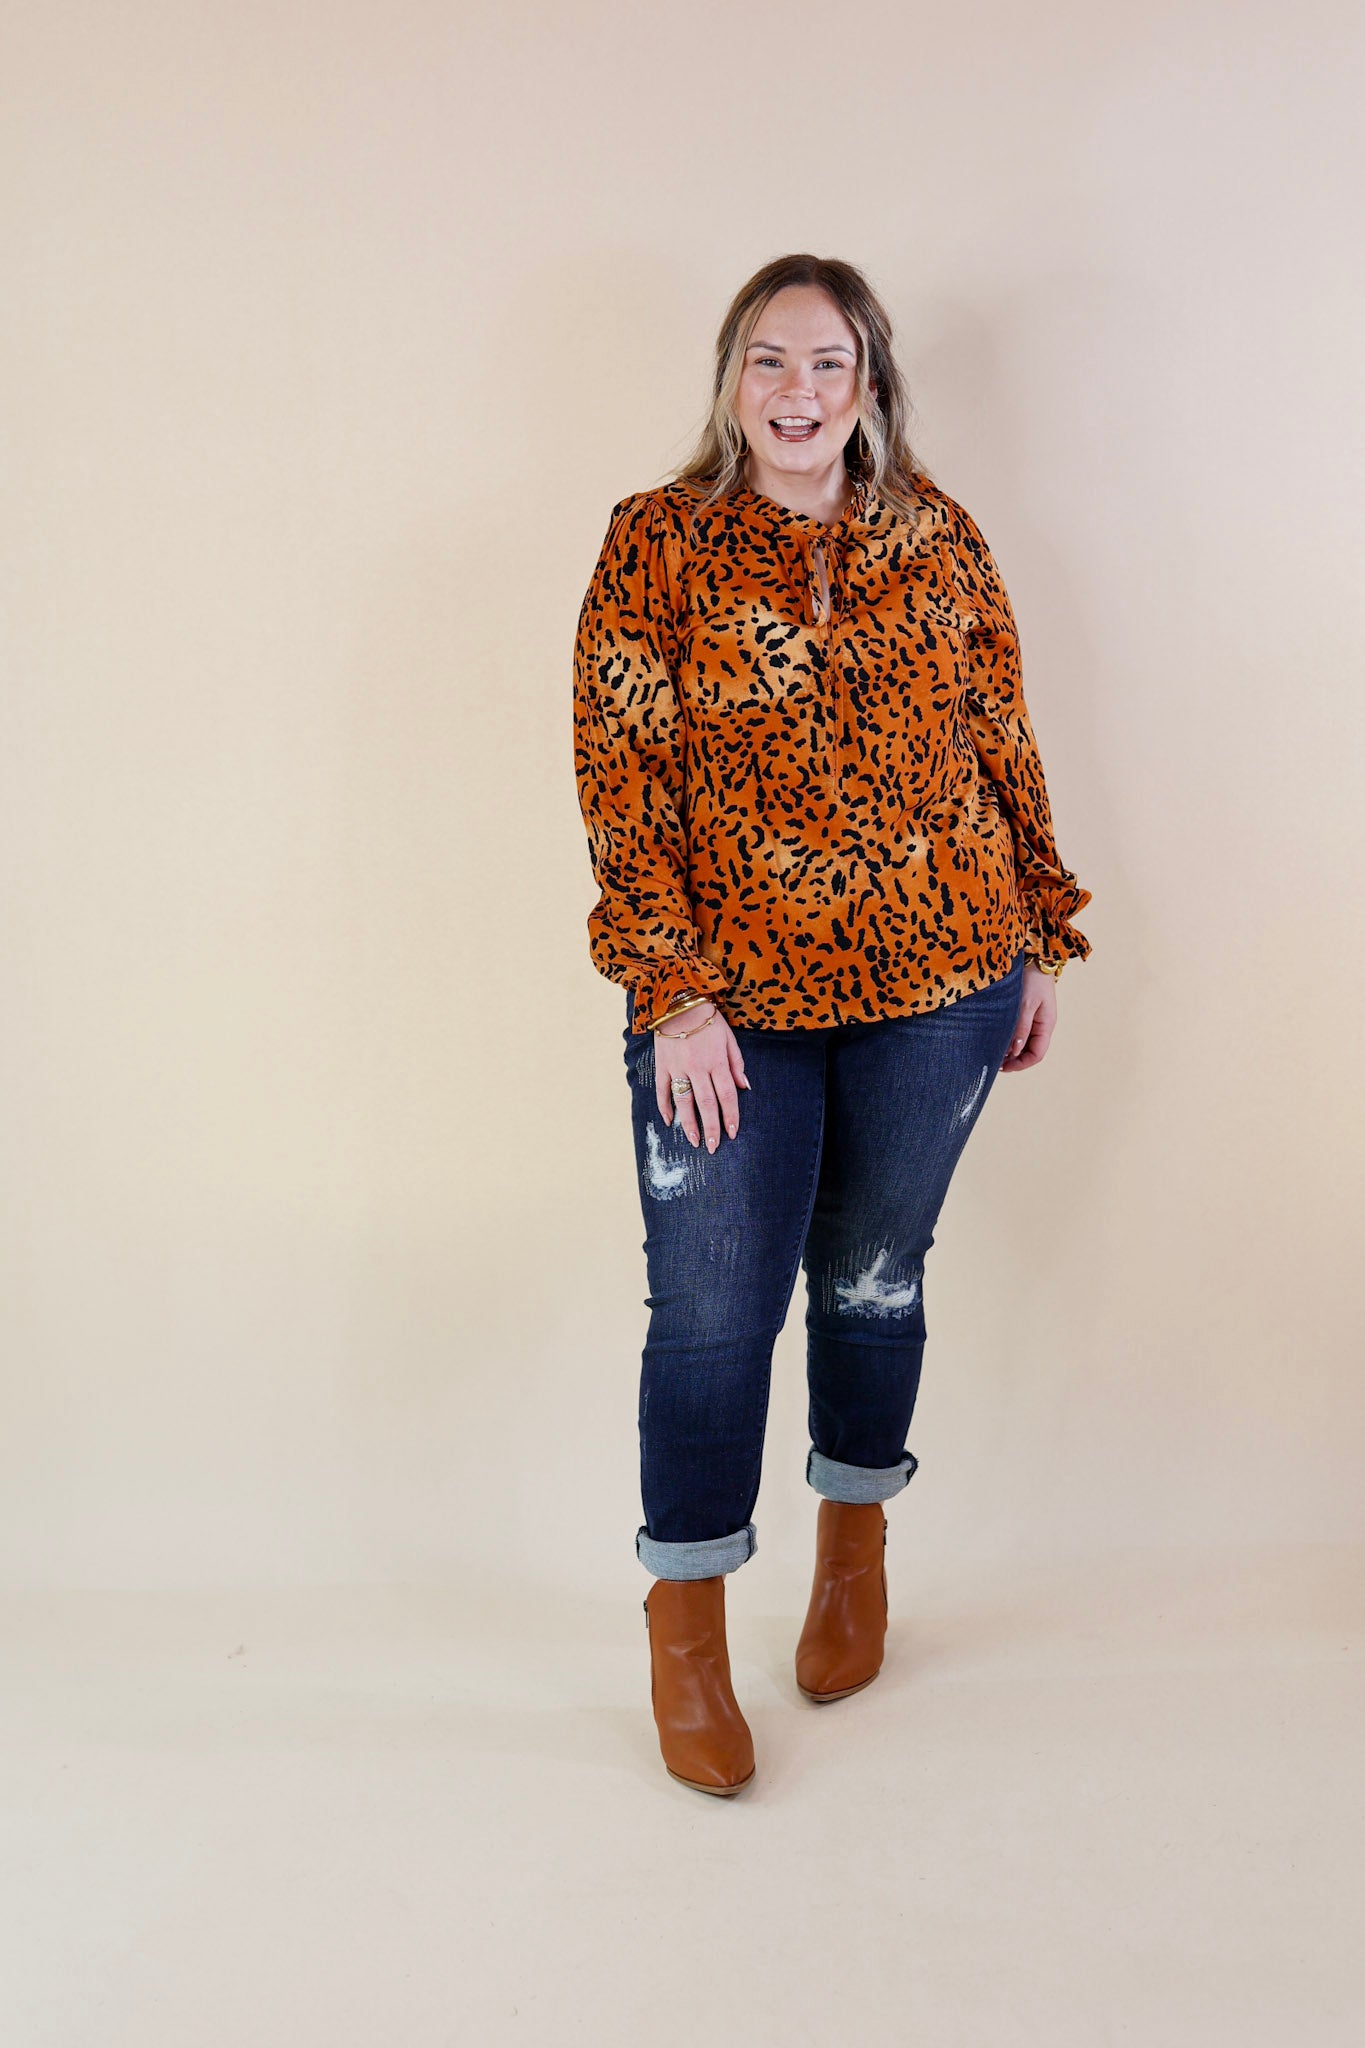 Boss Lady Leopard Print Top in Rust Orange - Giddy Up Glamour Boutique